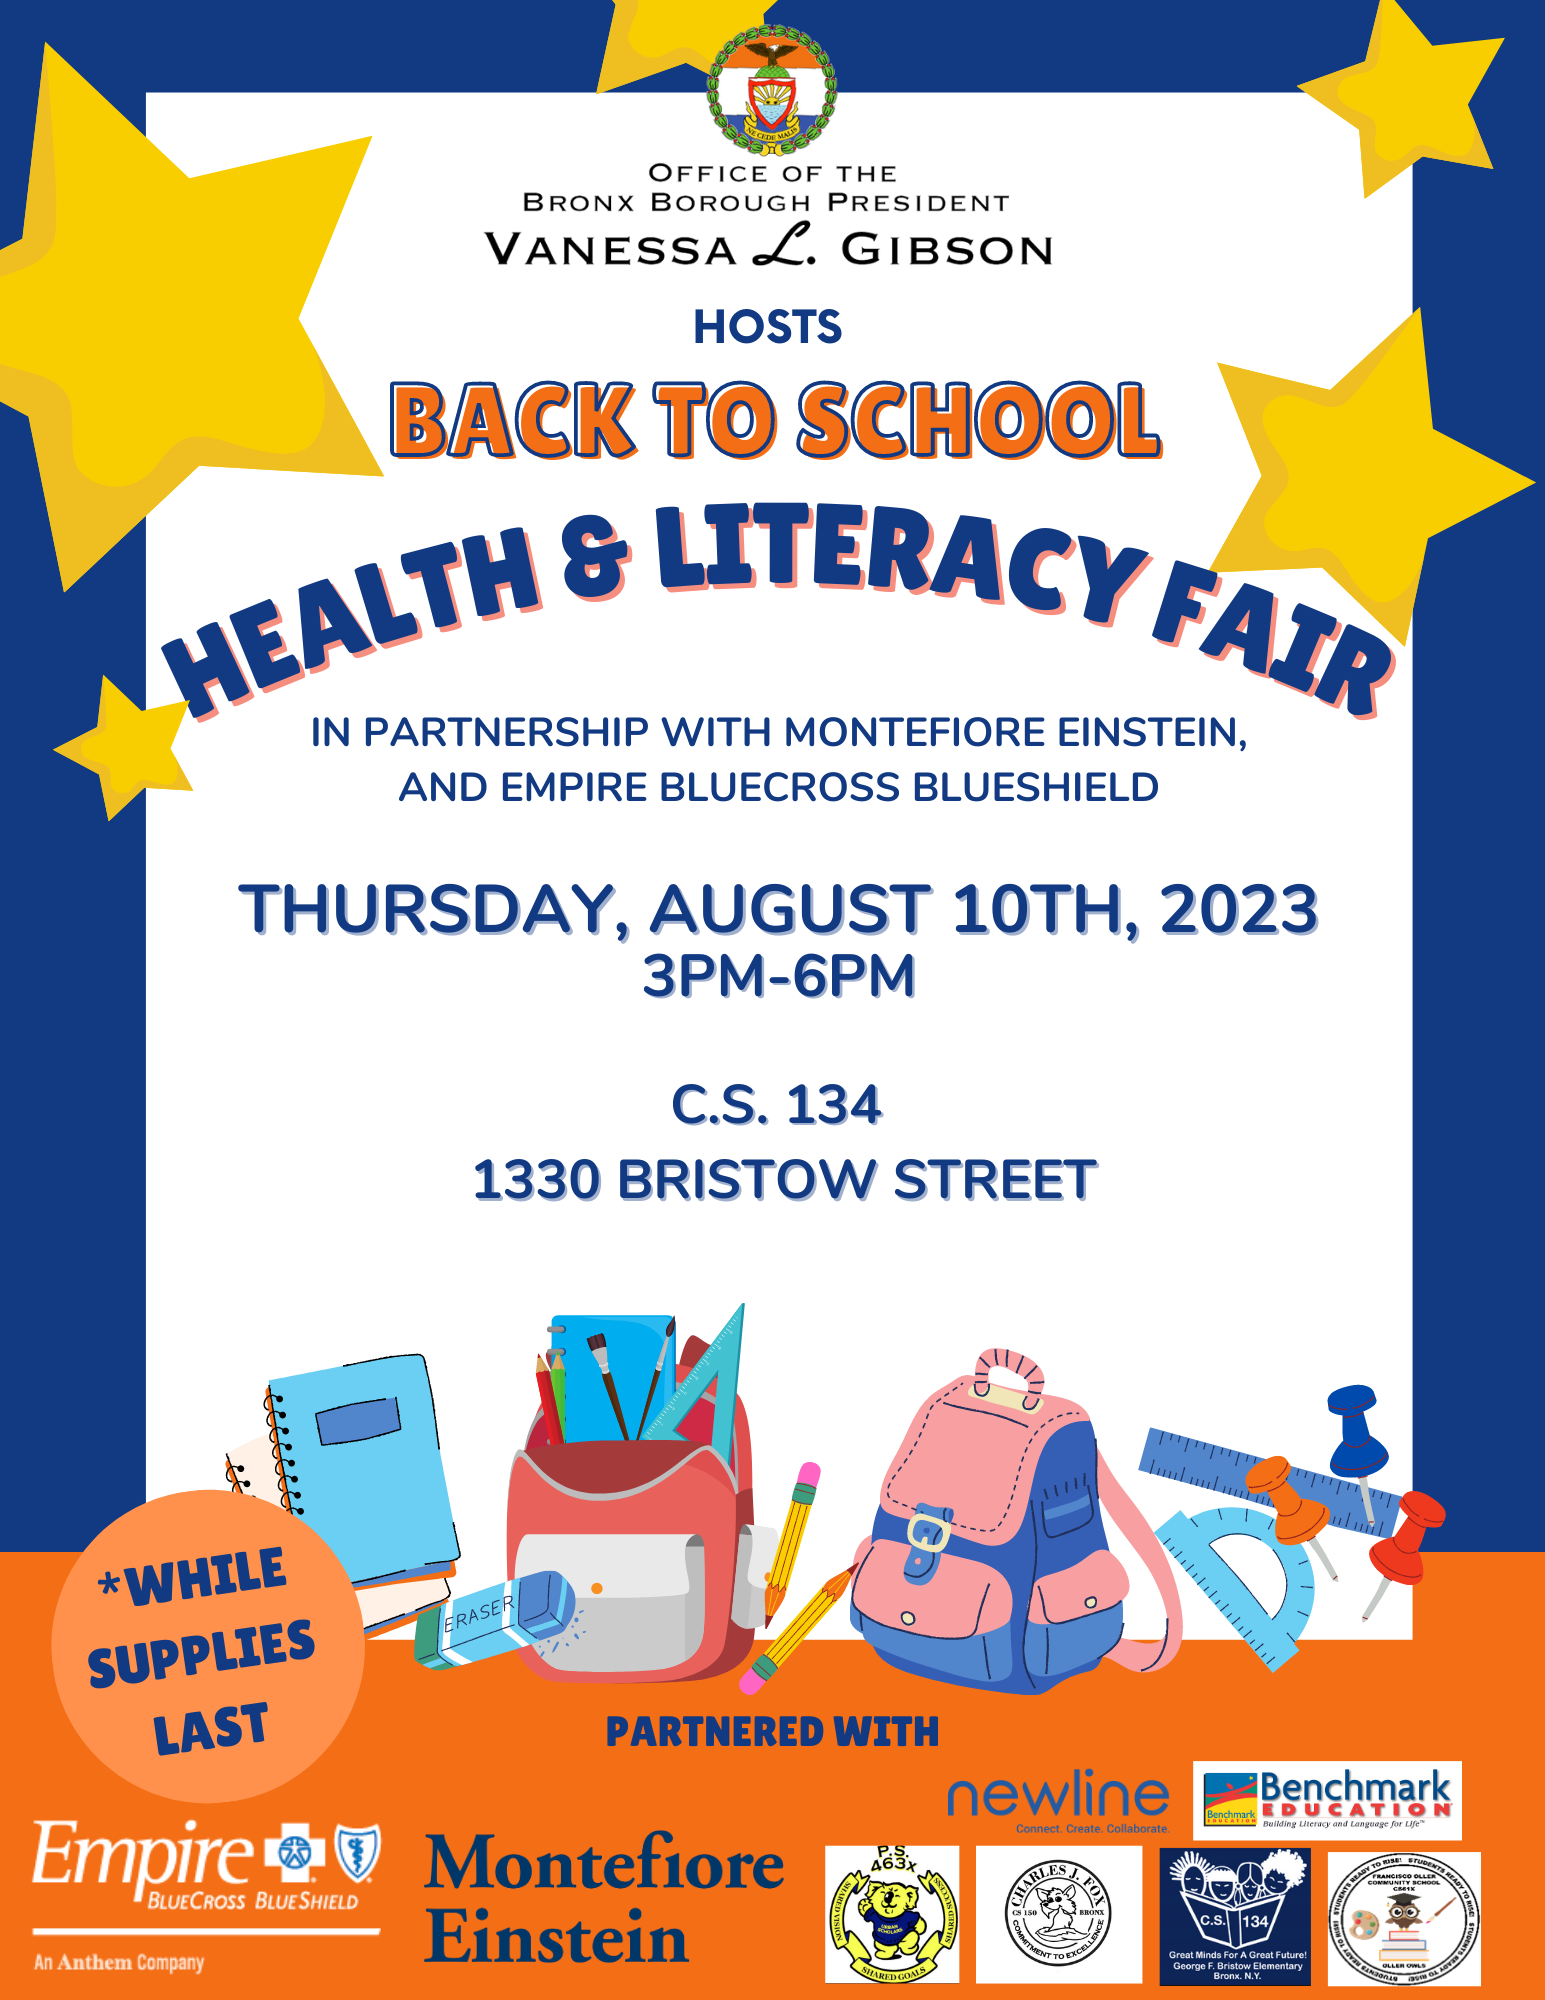 A flyer in English for the Back to School Health & Literacy Fair on August 10, 2023.